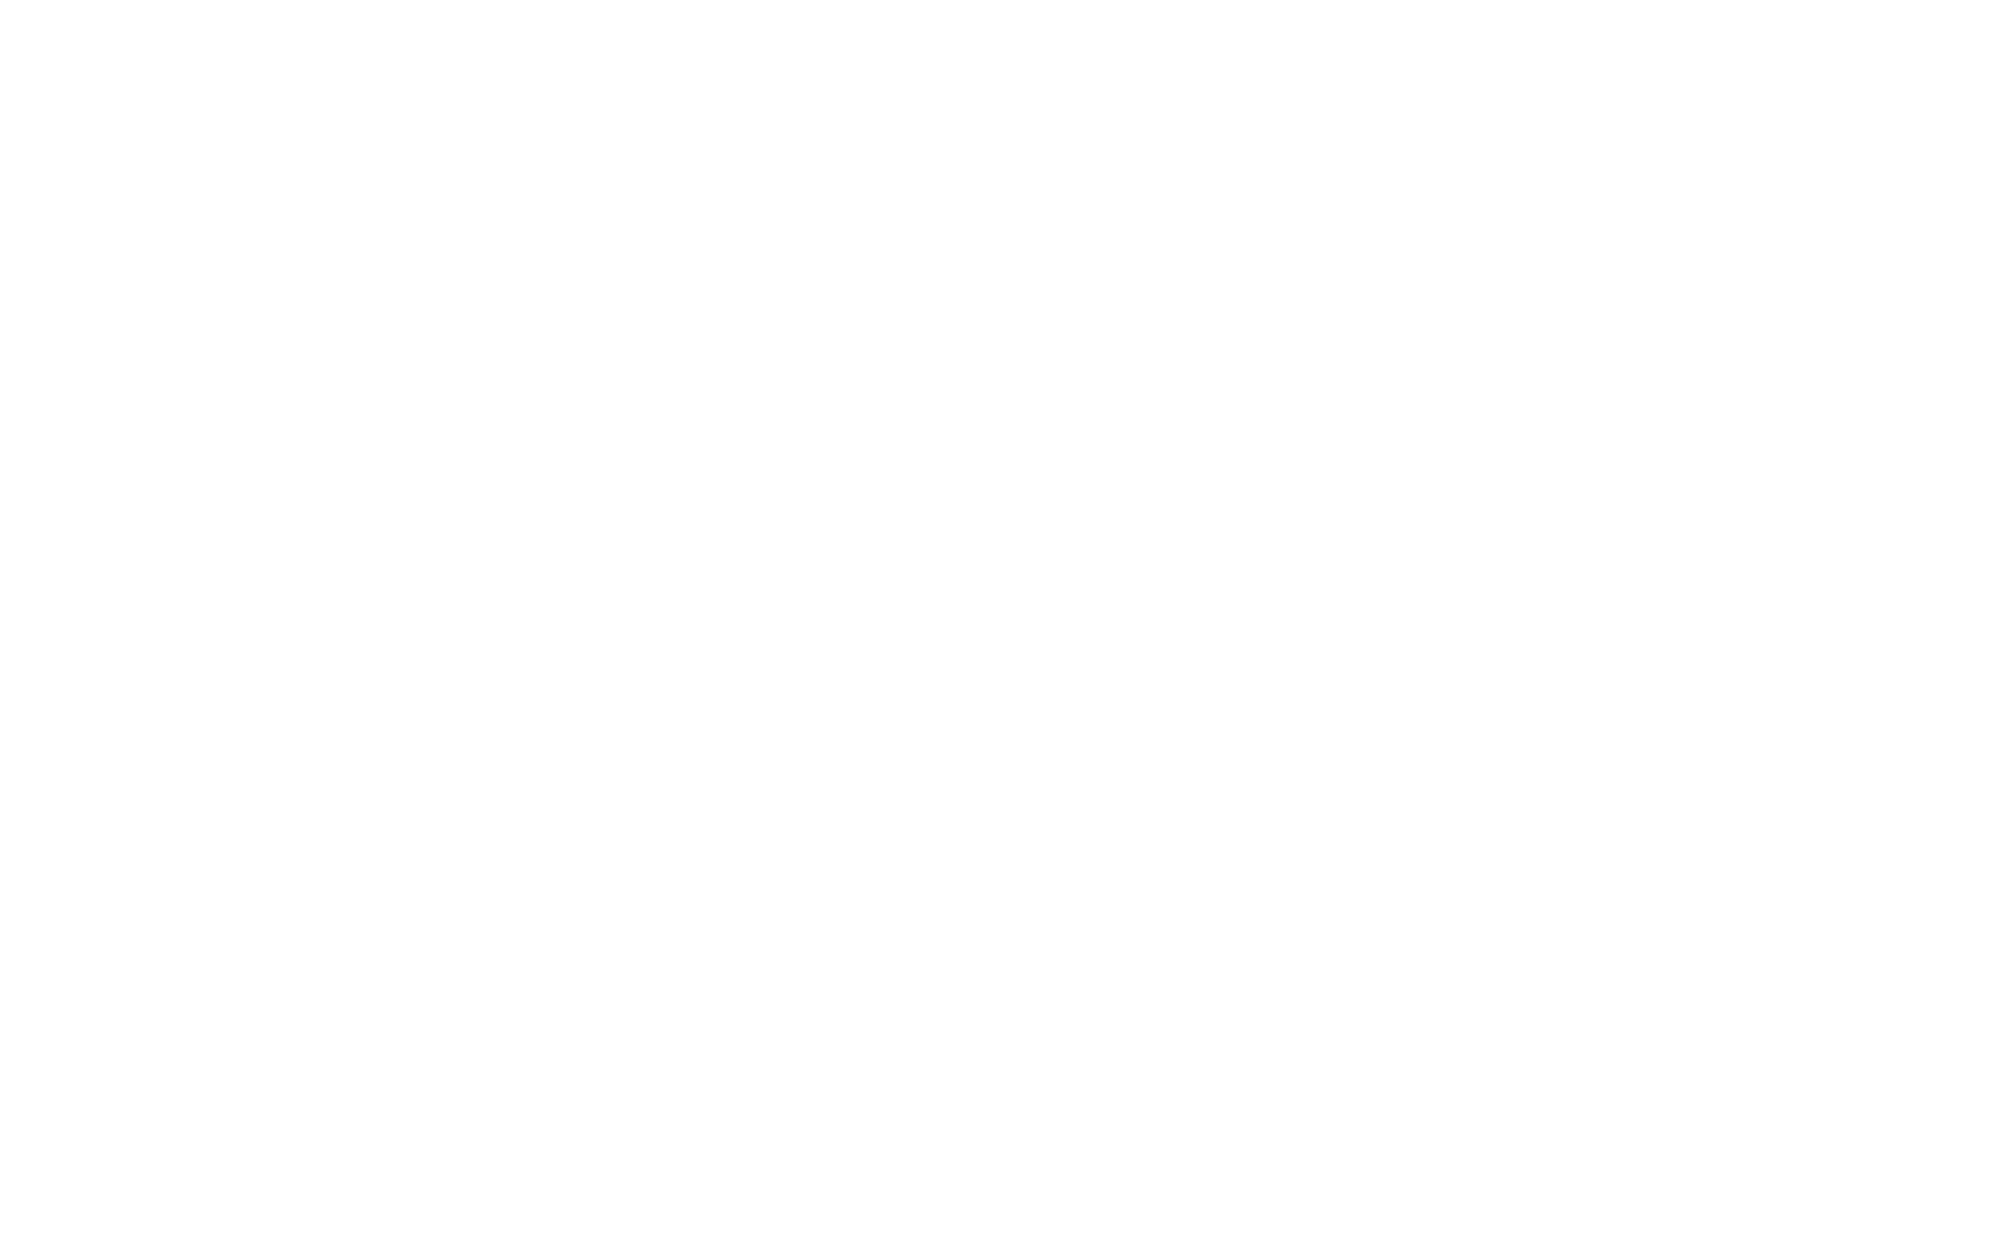 Better Chemicals